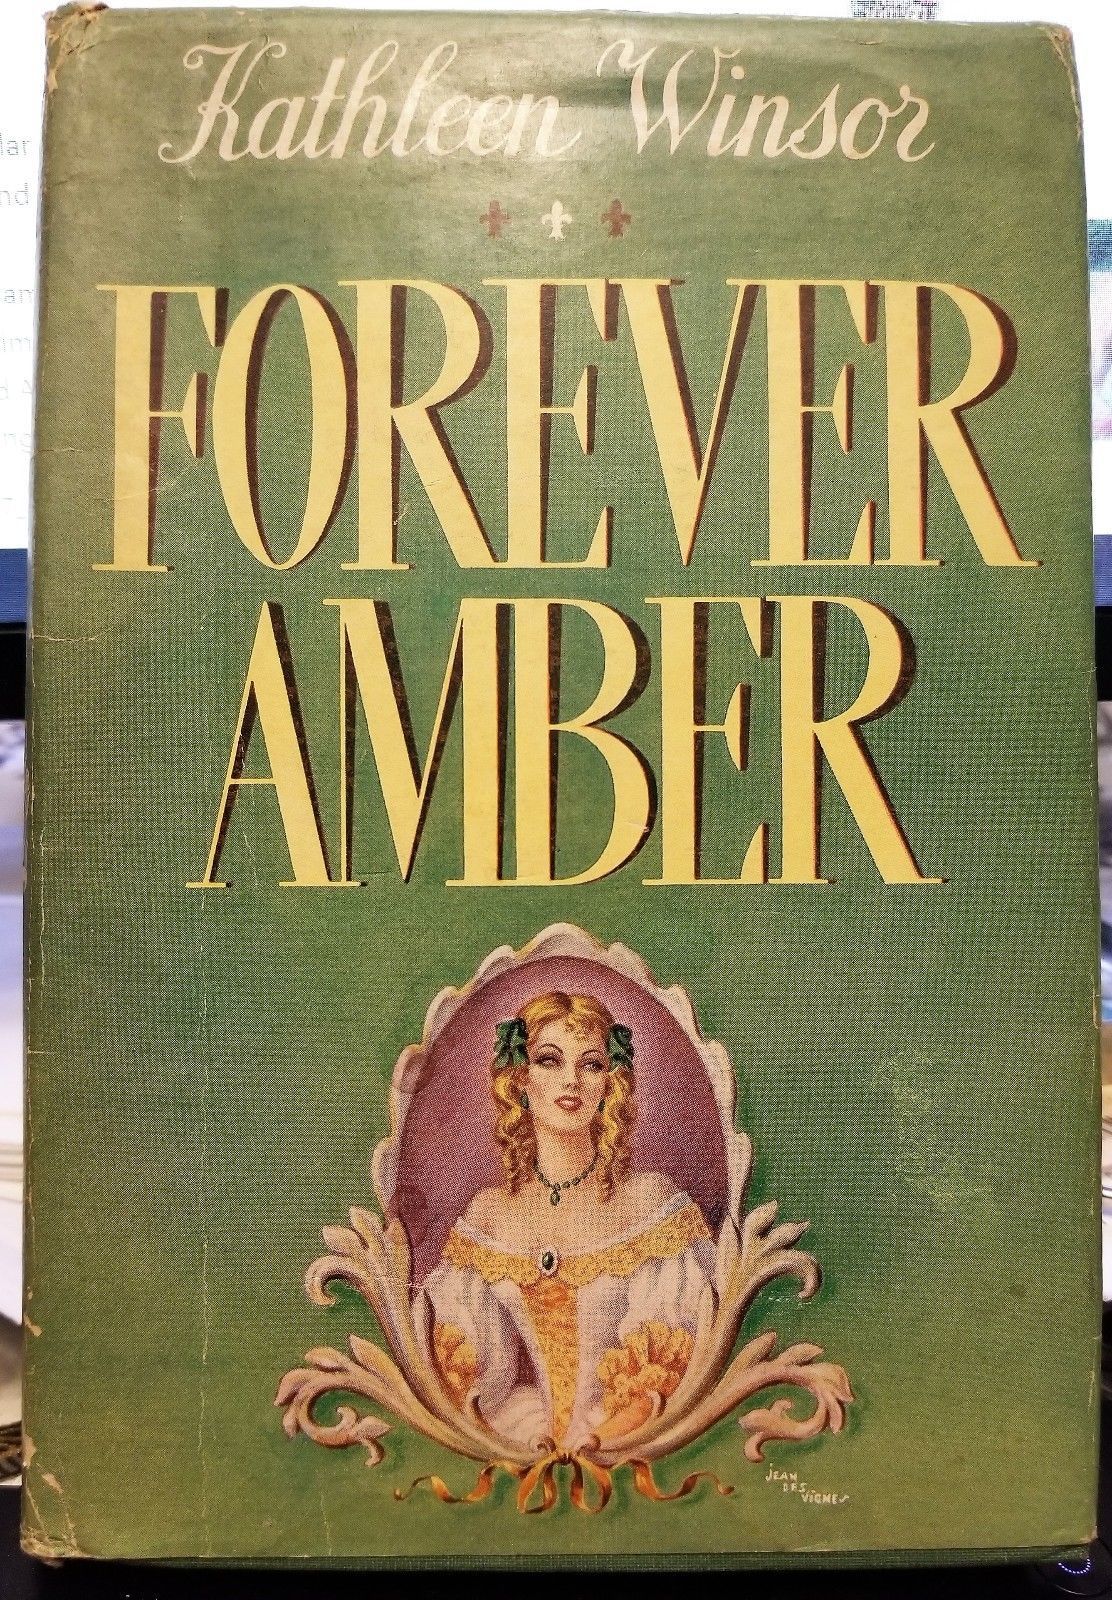 forever amber author